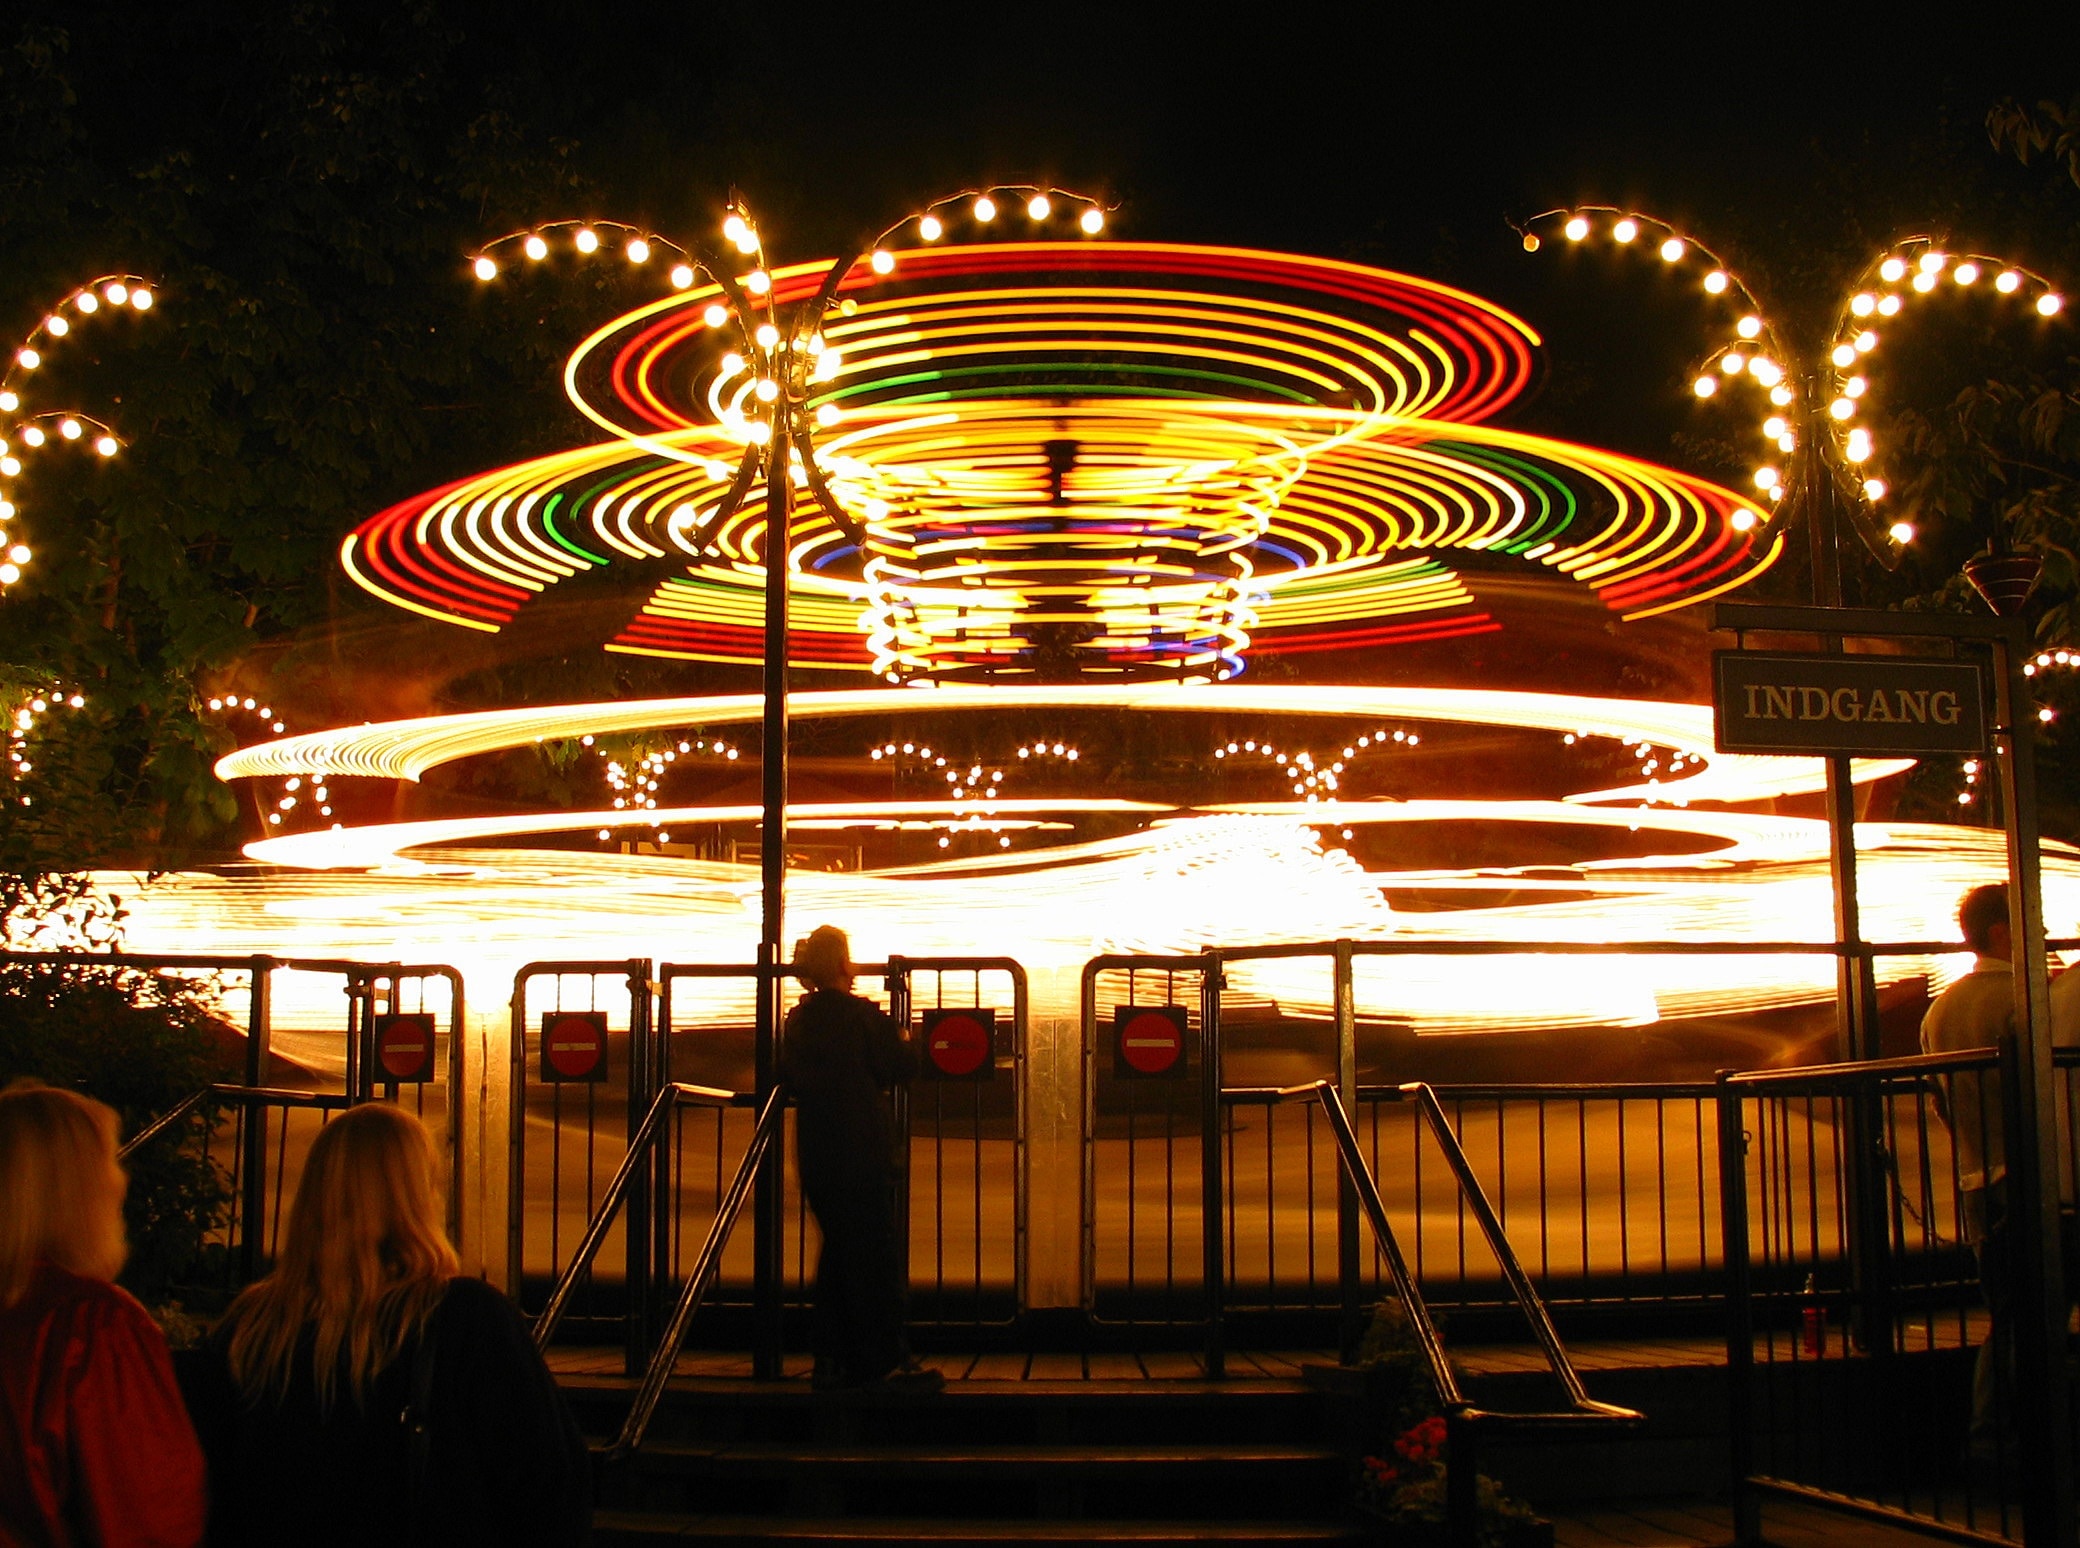 time lapse photo of carousel during night time